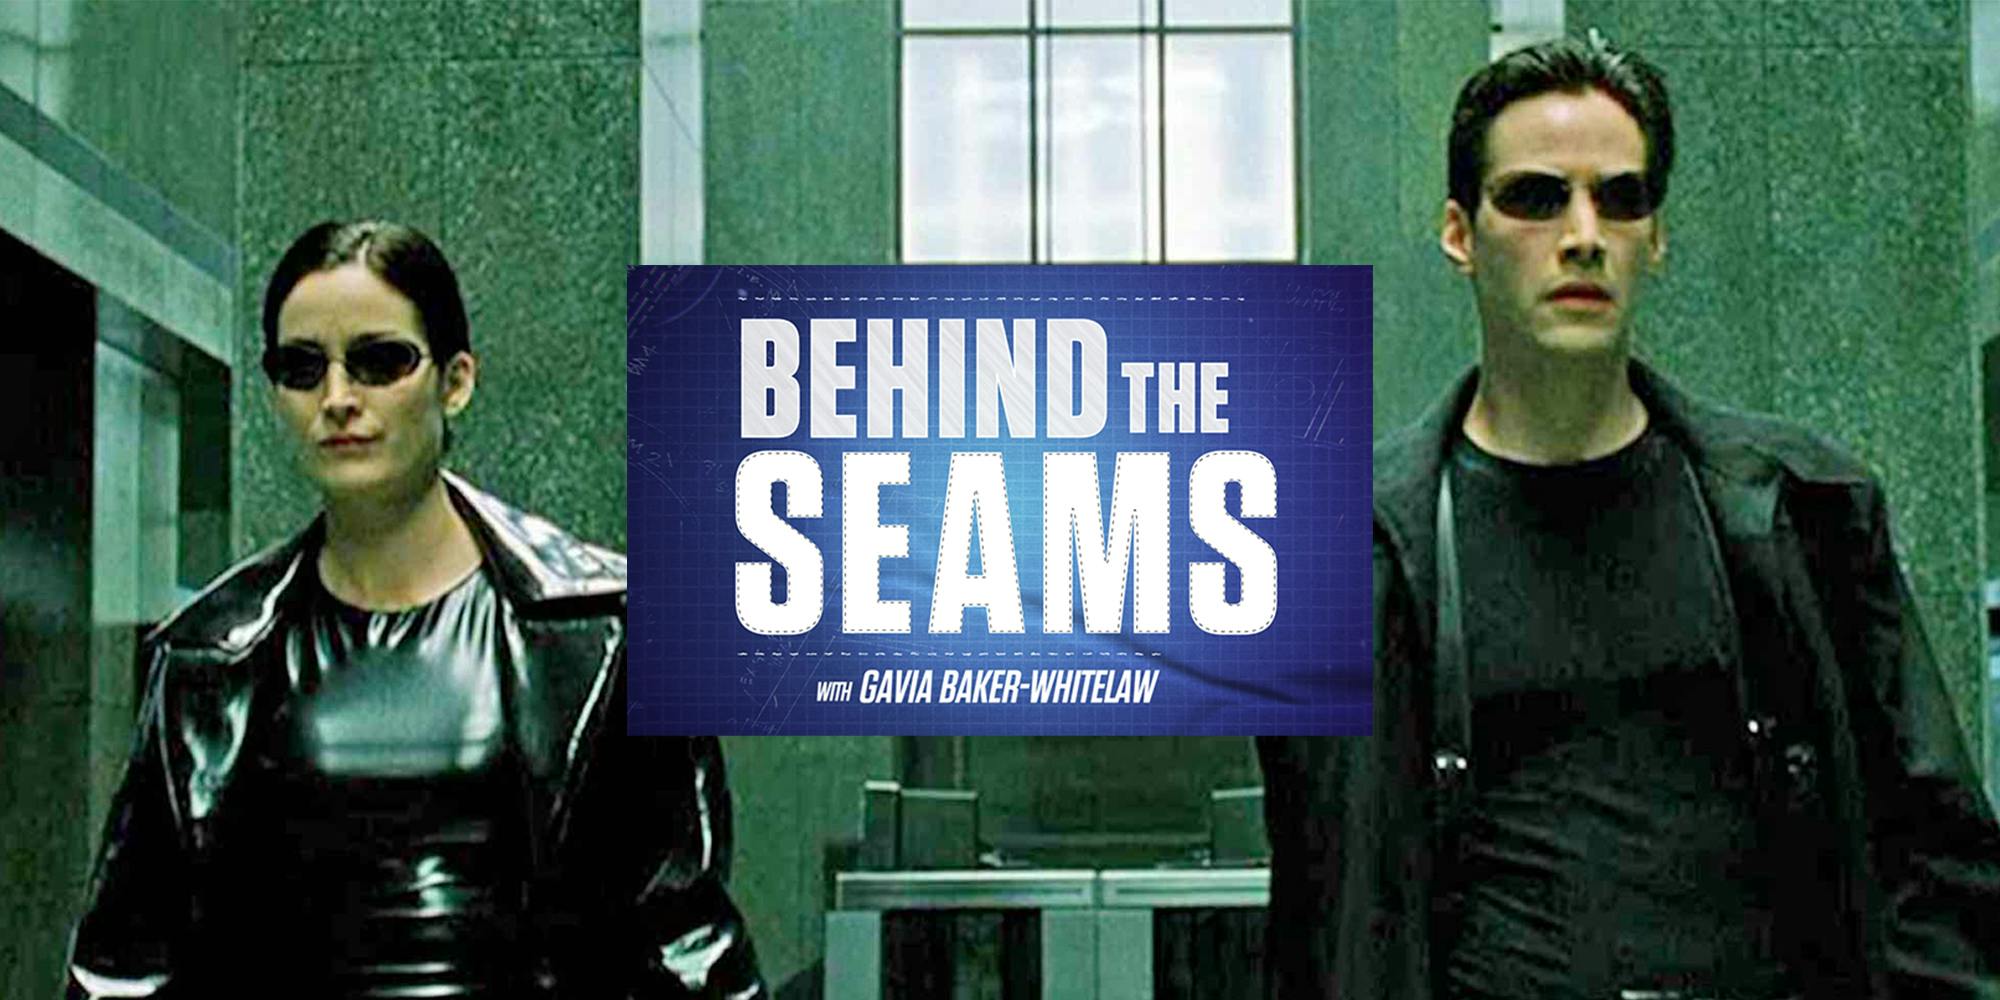 Trinity and Neo from The Matrix with "Behind the Seams with Gavia Baker-Whitelaw" logo